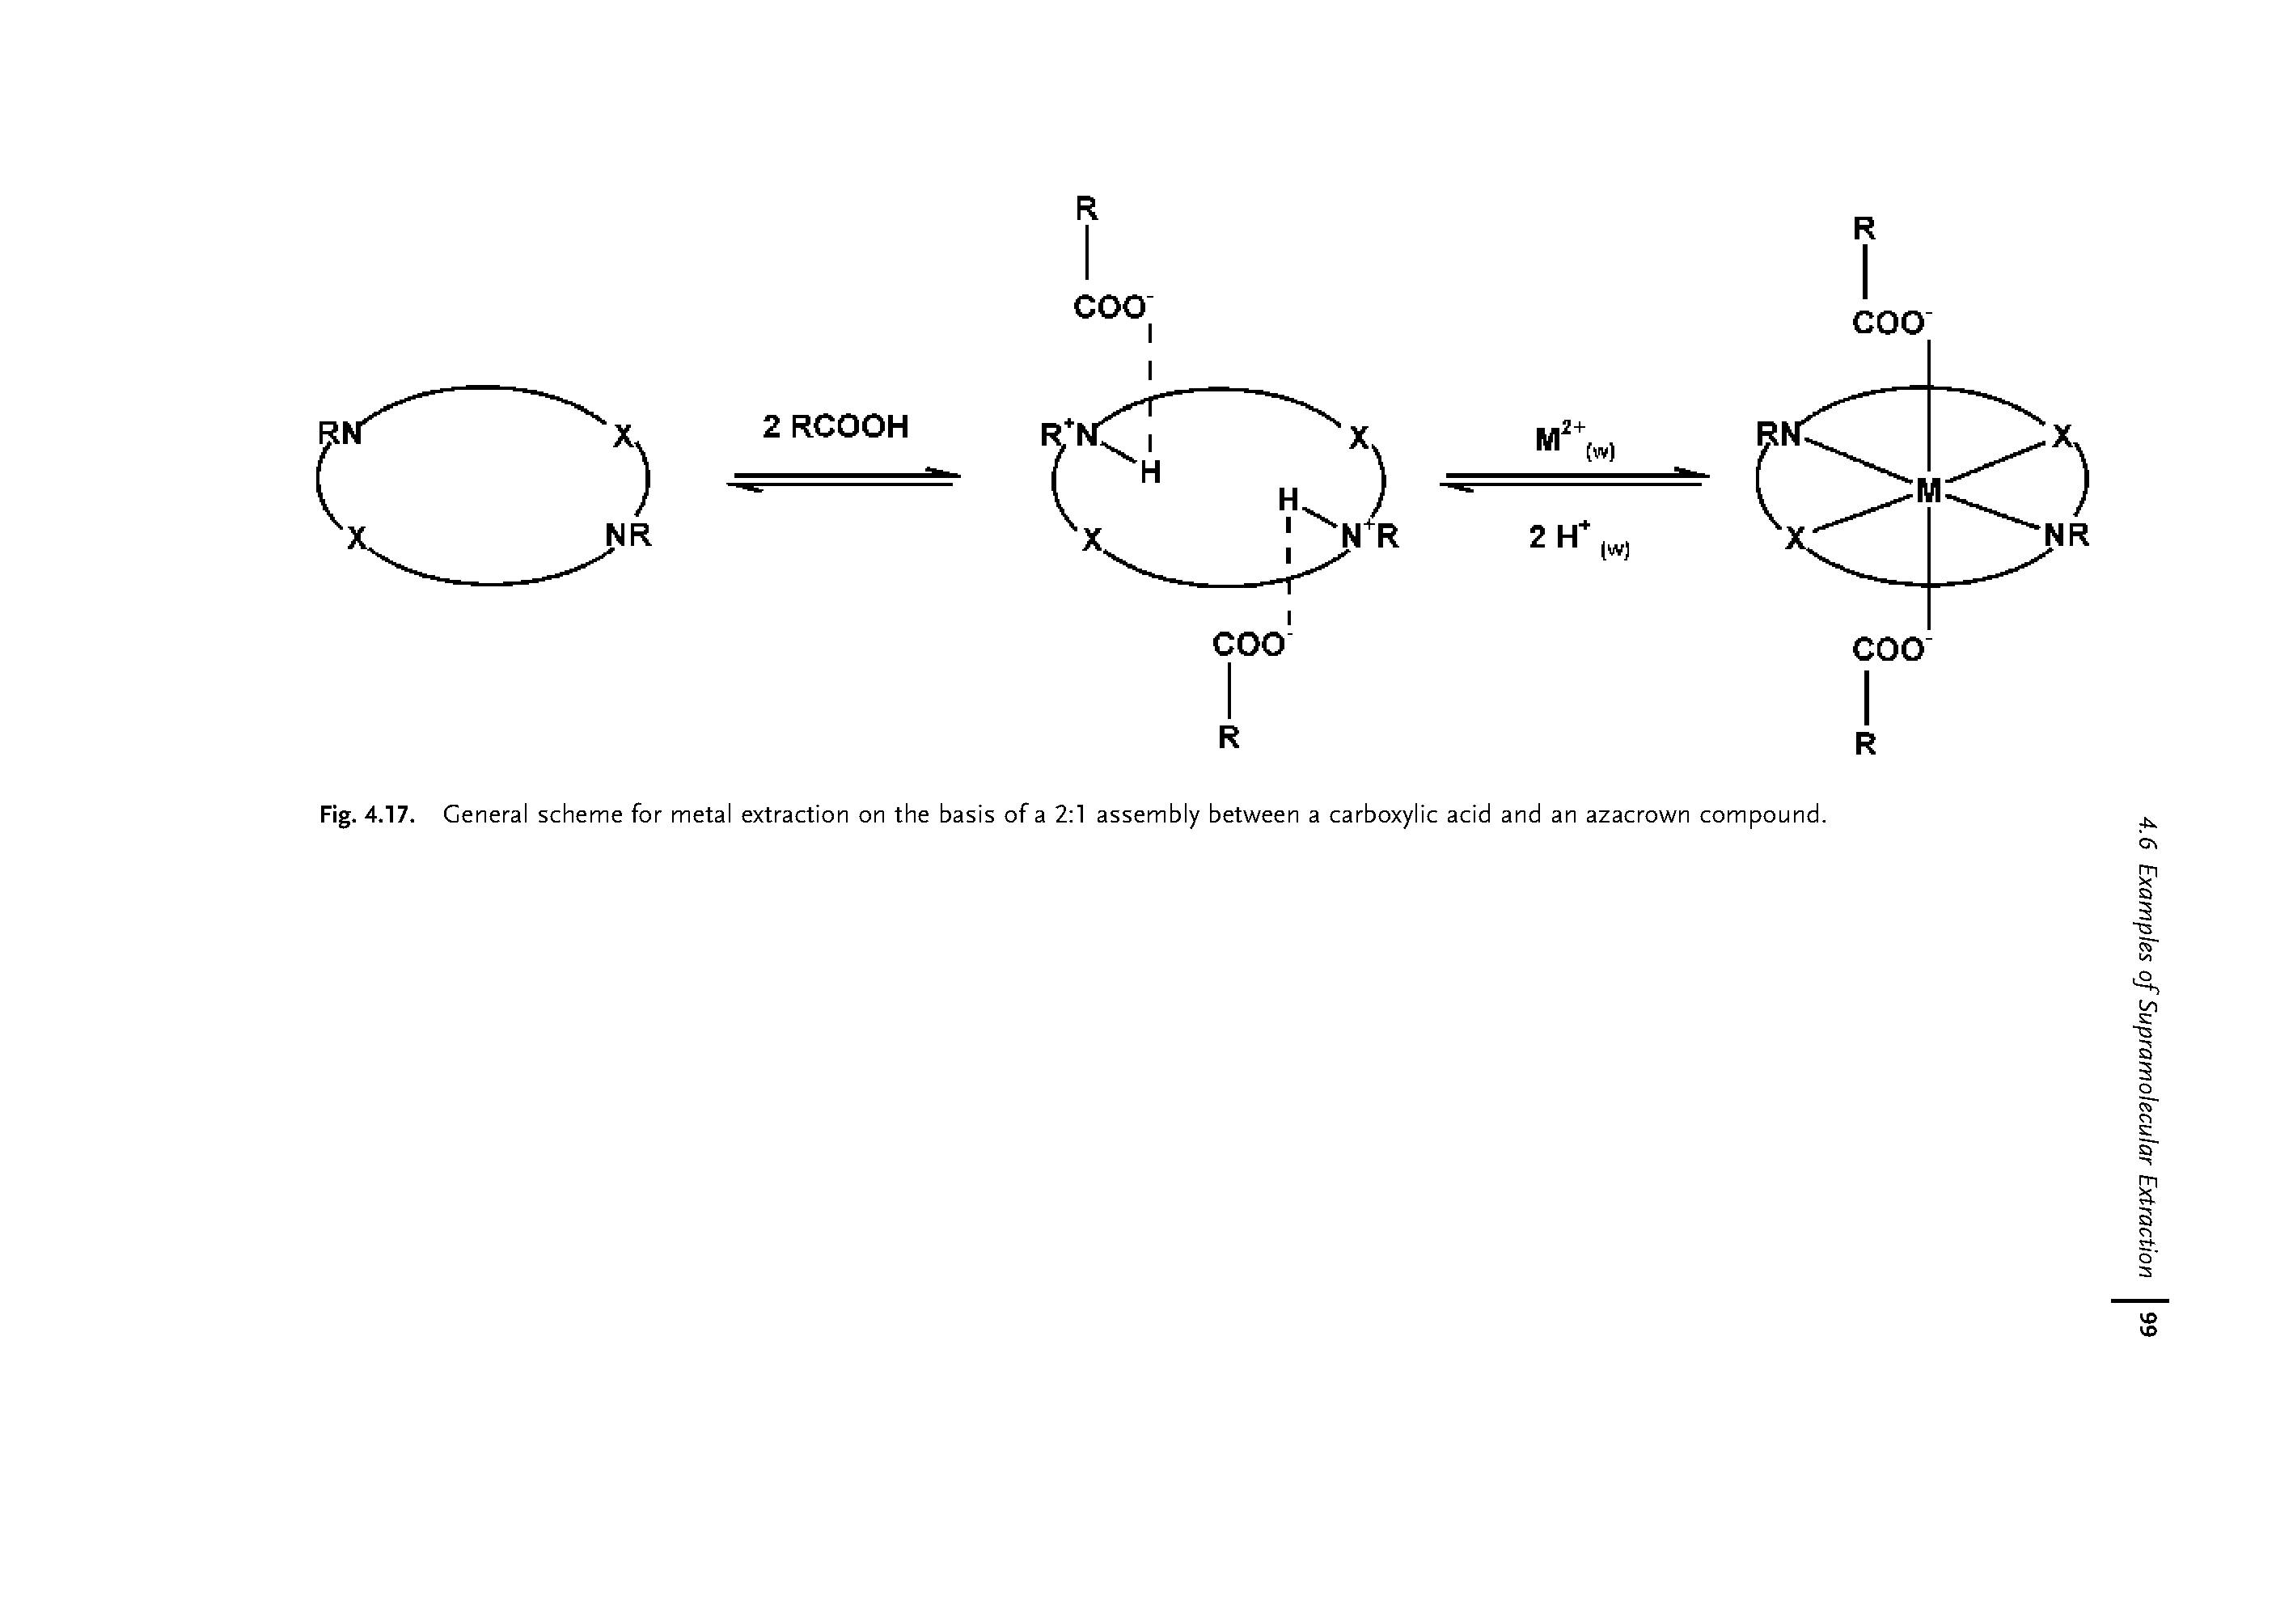 Fig. 4.17. General scheme for metal extraction on the basis of a 2 1 assembly between a carboxylic acid and an azacrown compound.